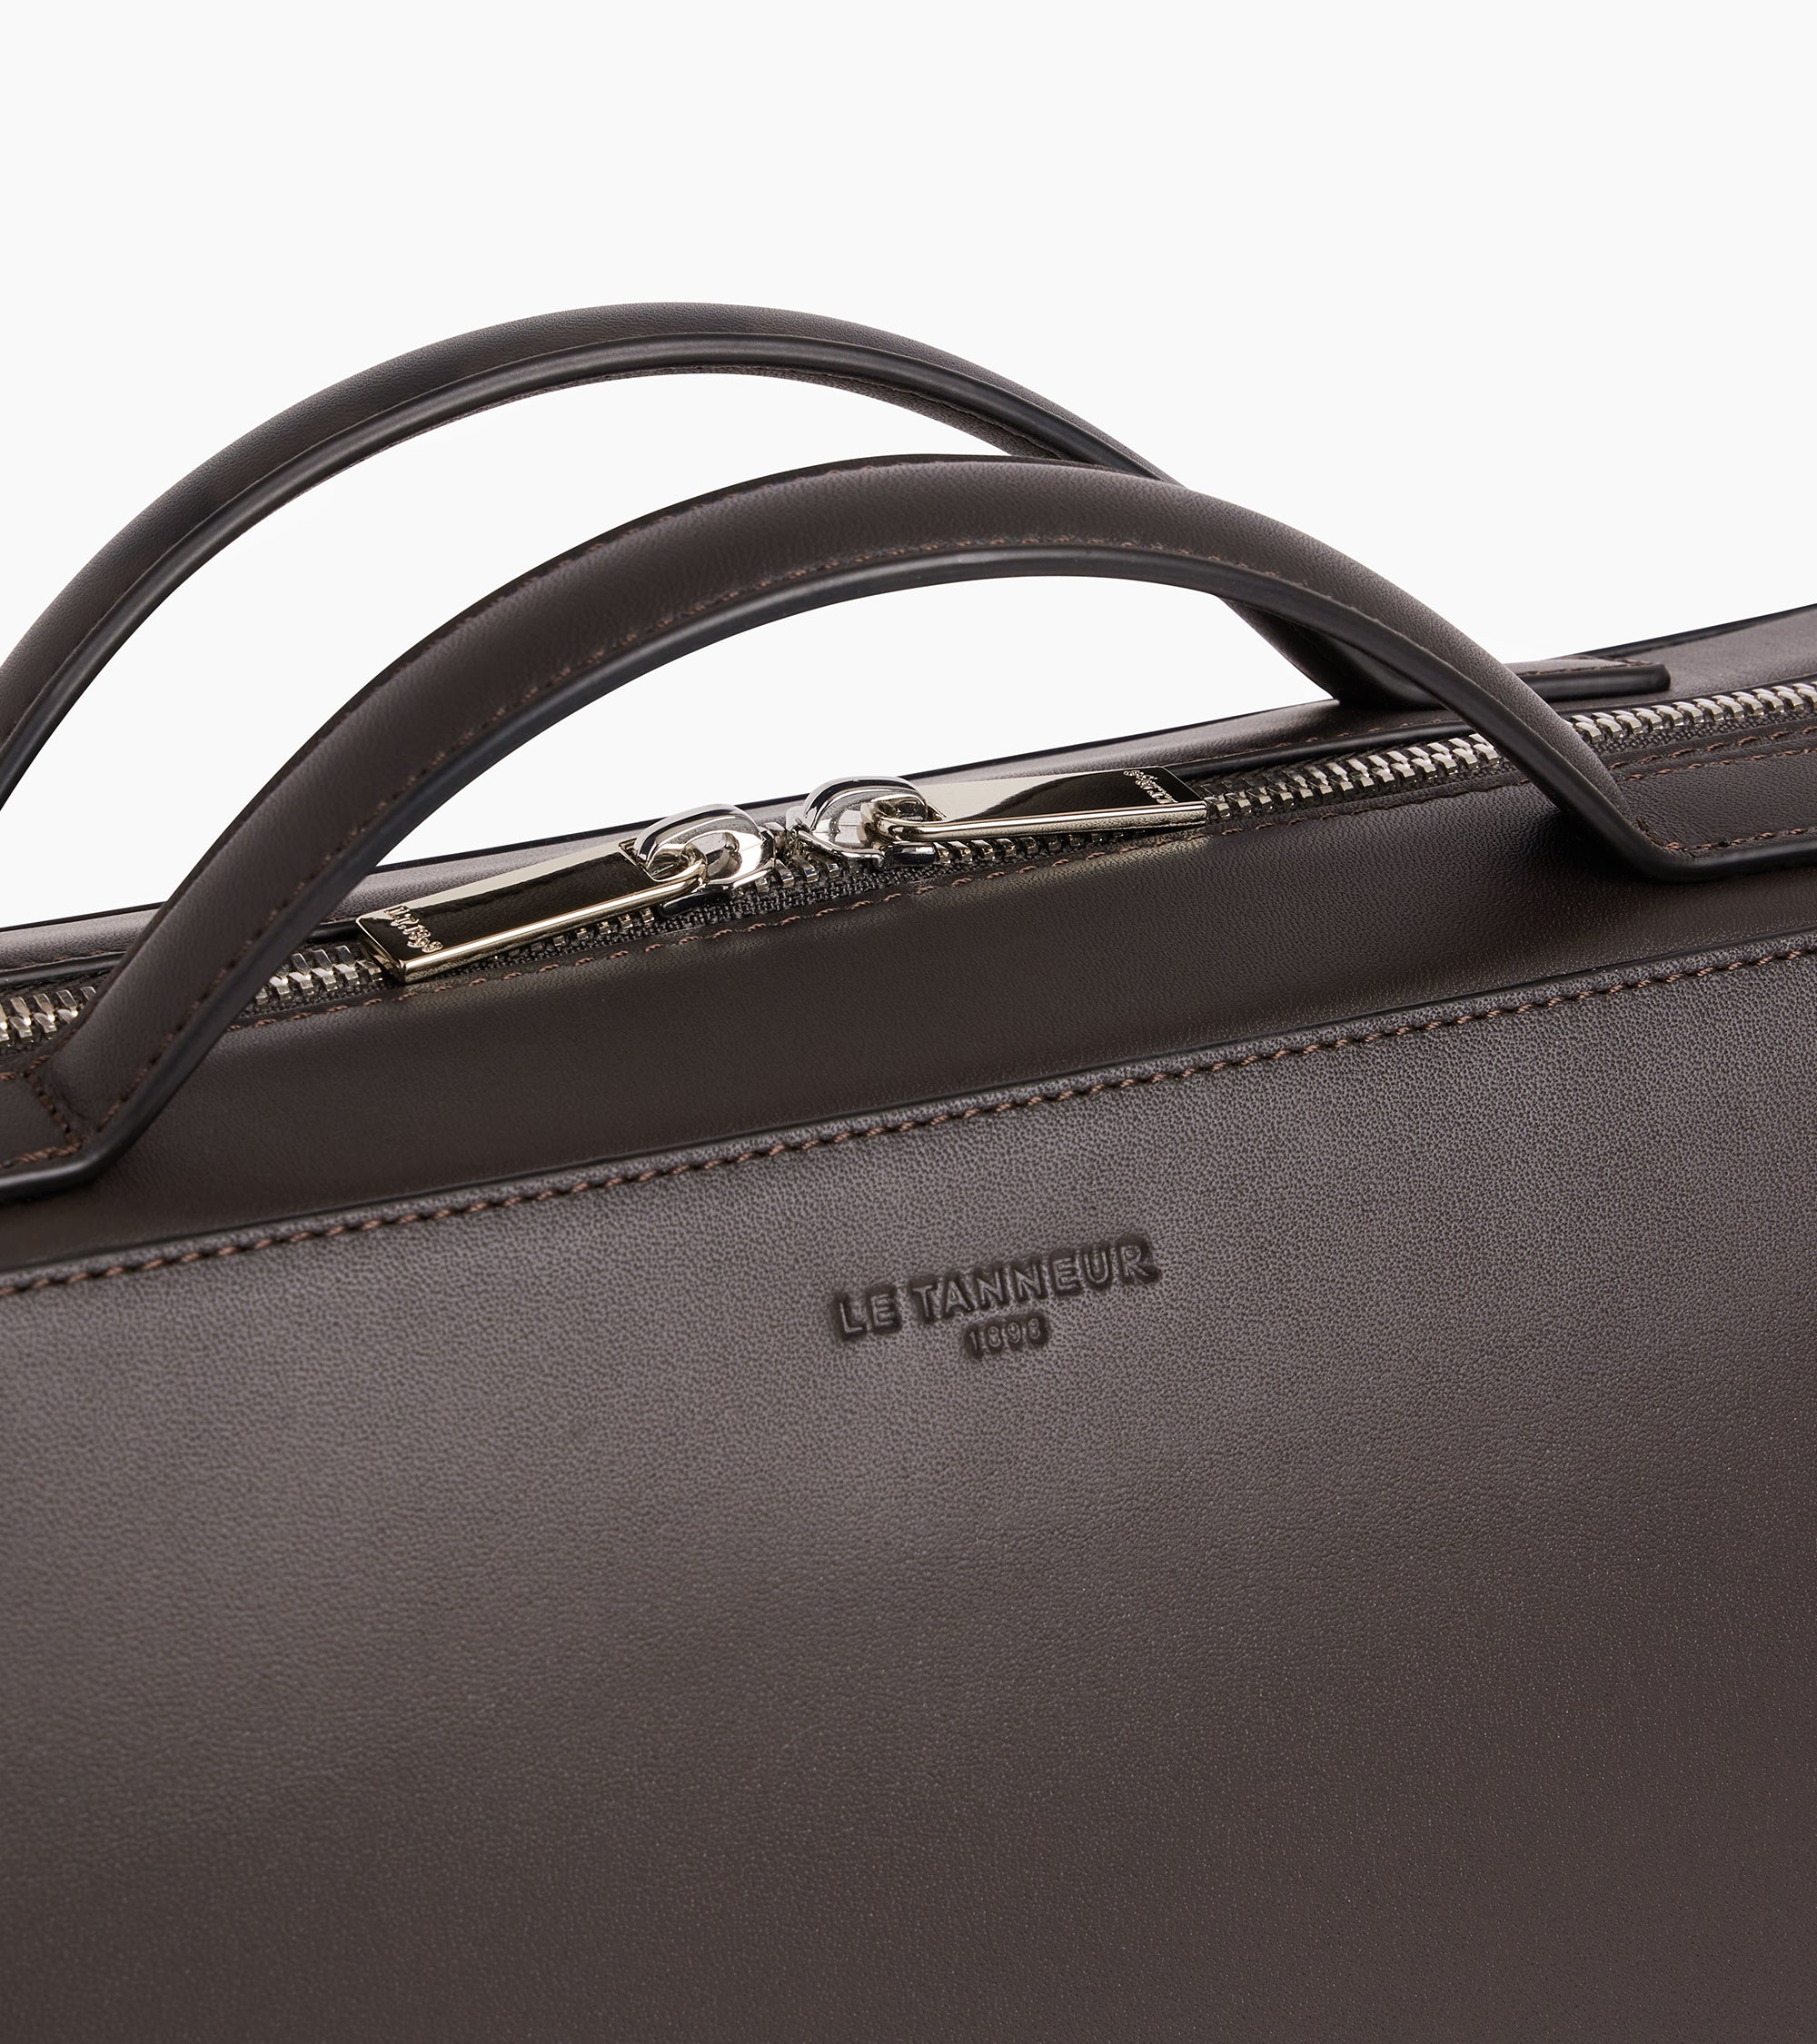 Albert 14" Briefcase in smooth leather